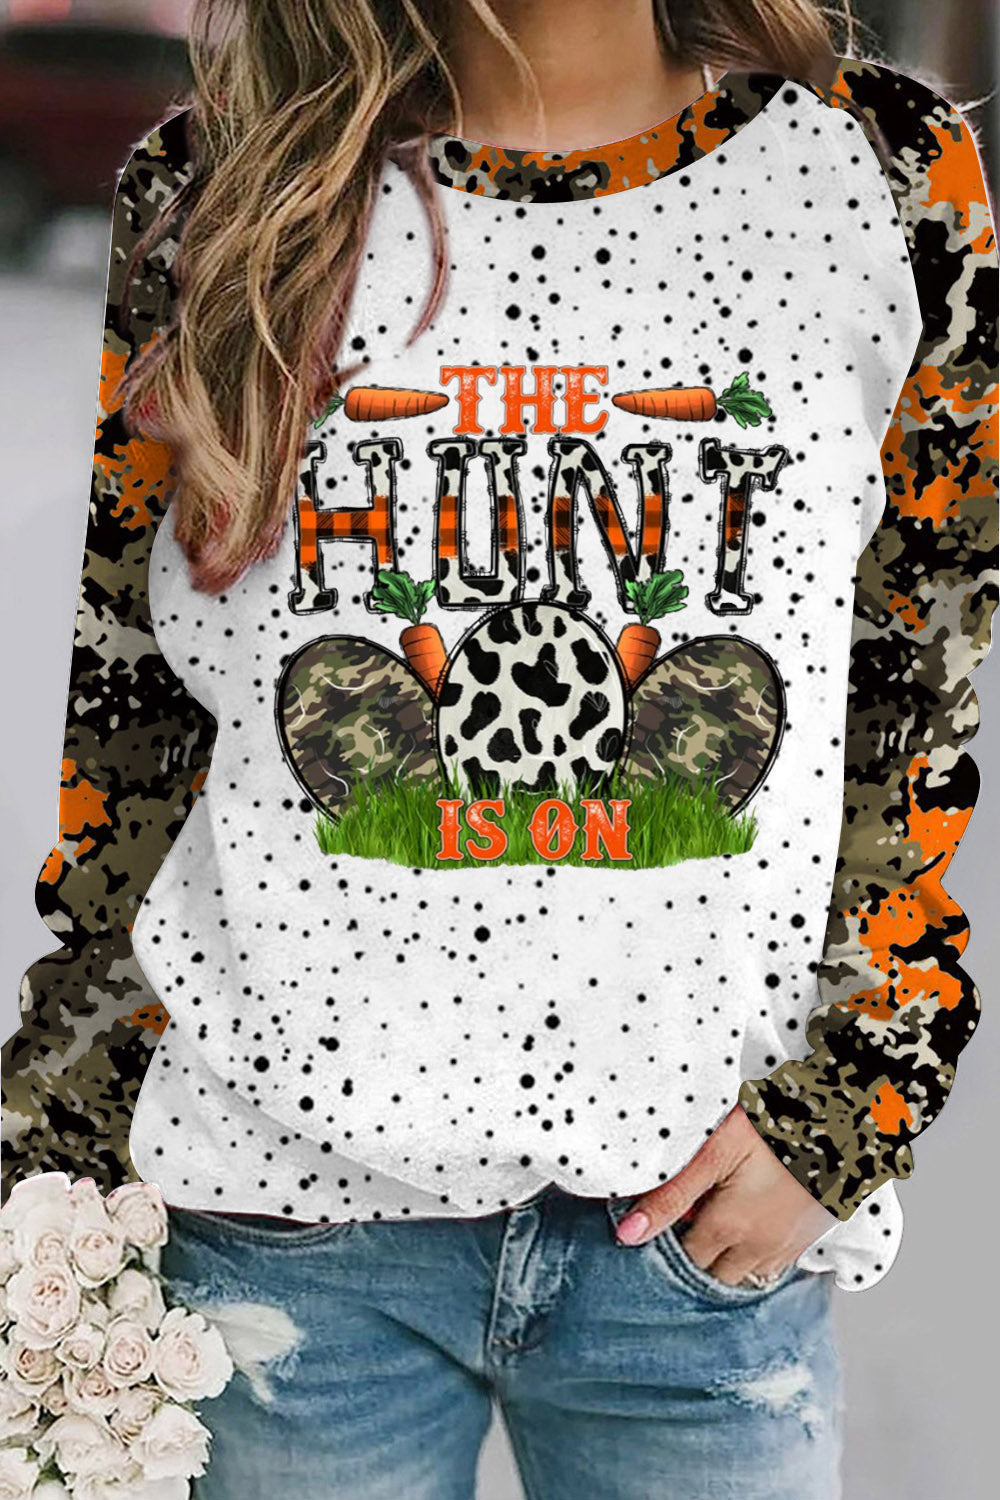 Casual The Hunt Is On Happy Easter ArmyGreen Carrot Eggs Printed Sweatshirt